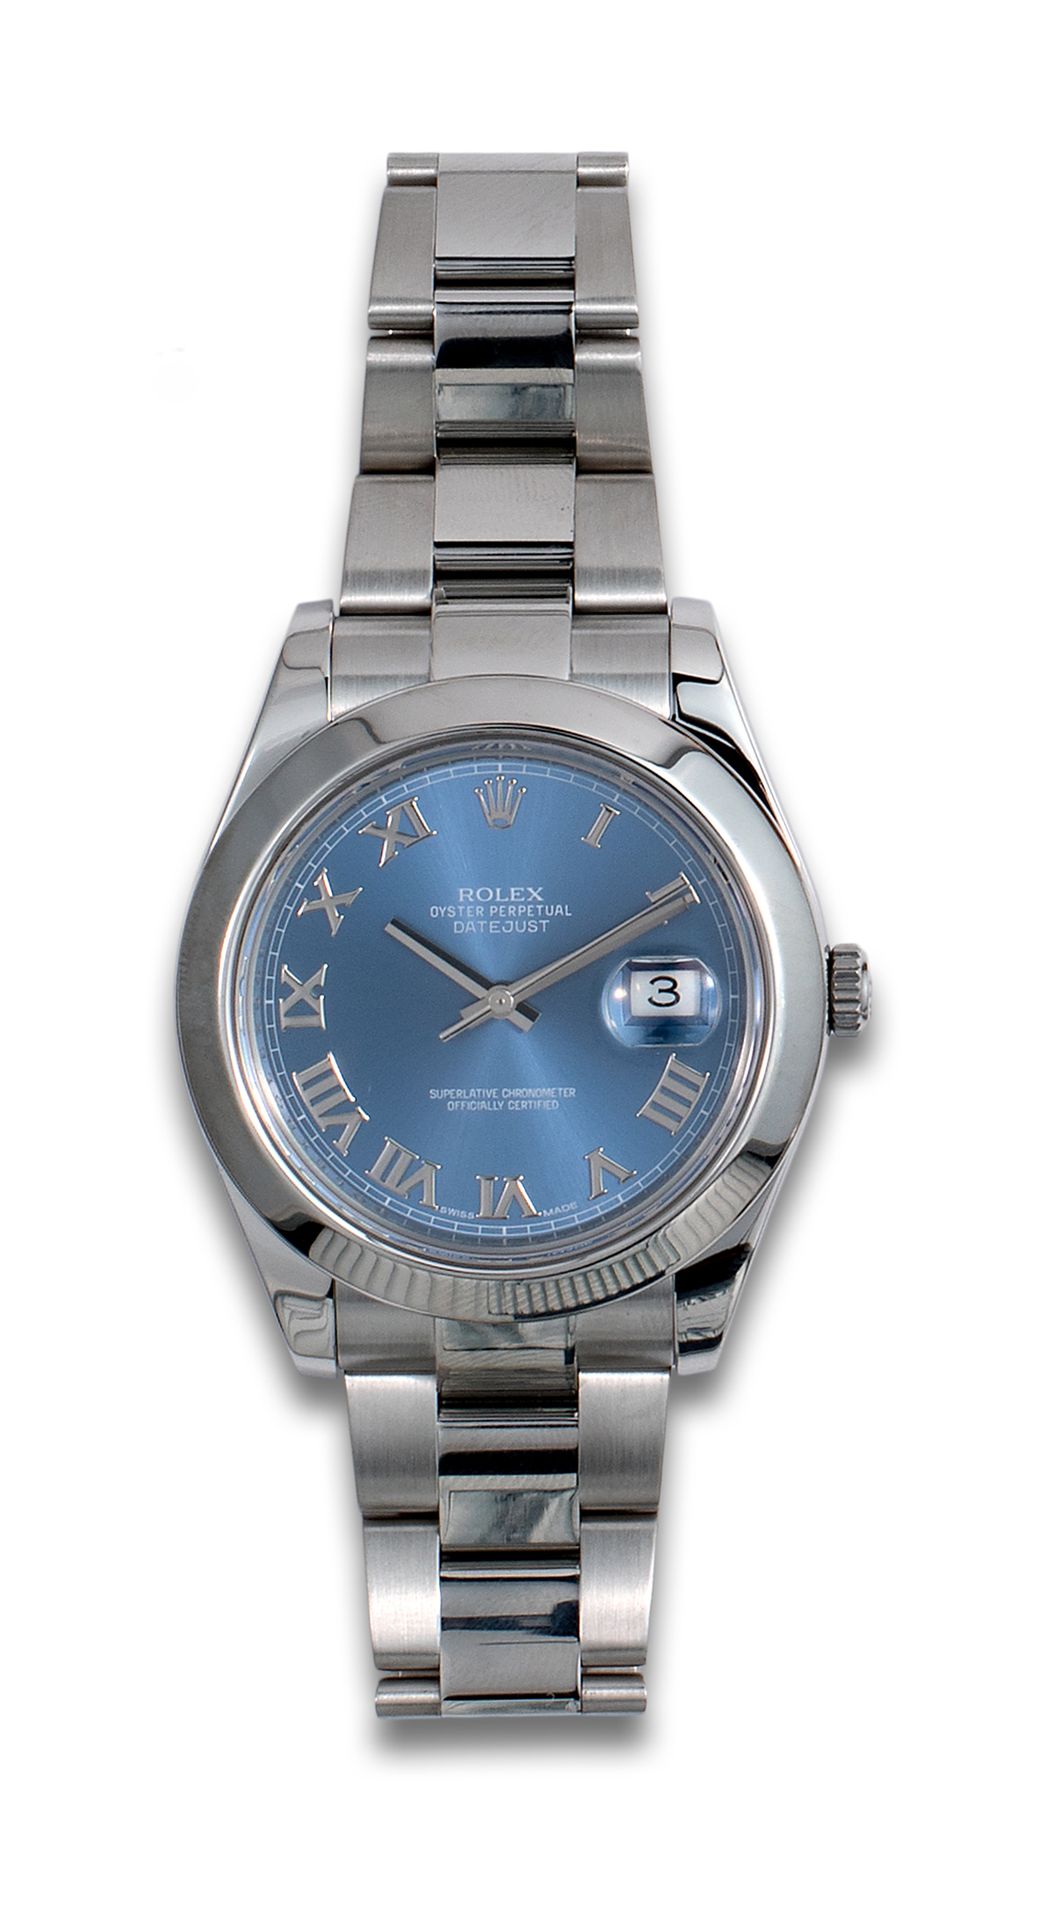 ROLEX OYSTER PERPETUAL DATEJUST WRISTWATCH, STEEL ROLEX OYSTER PERPETUAL DATEJUS&hellip;